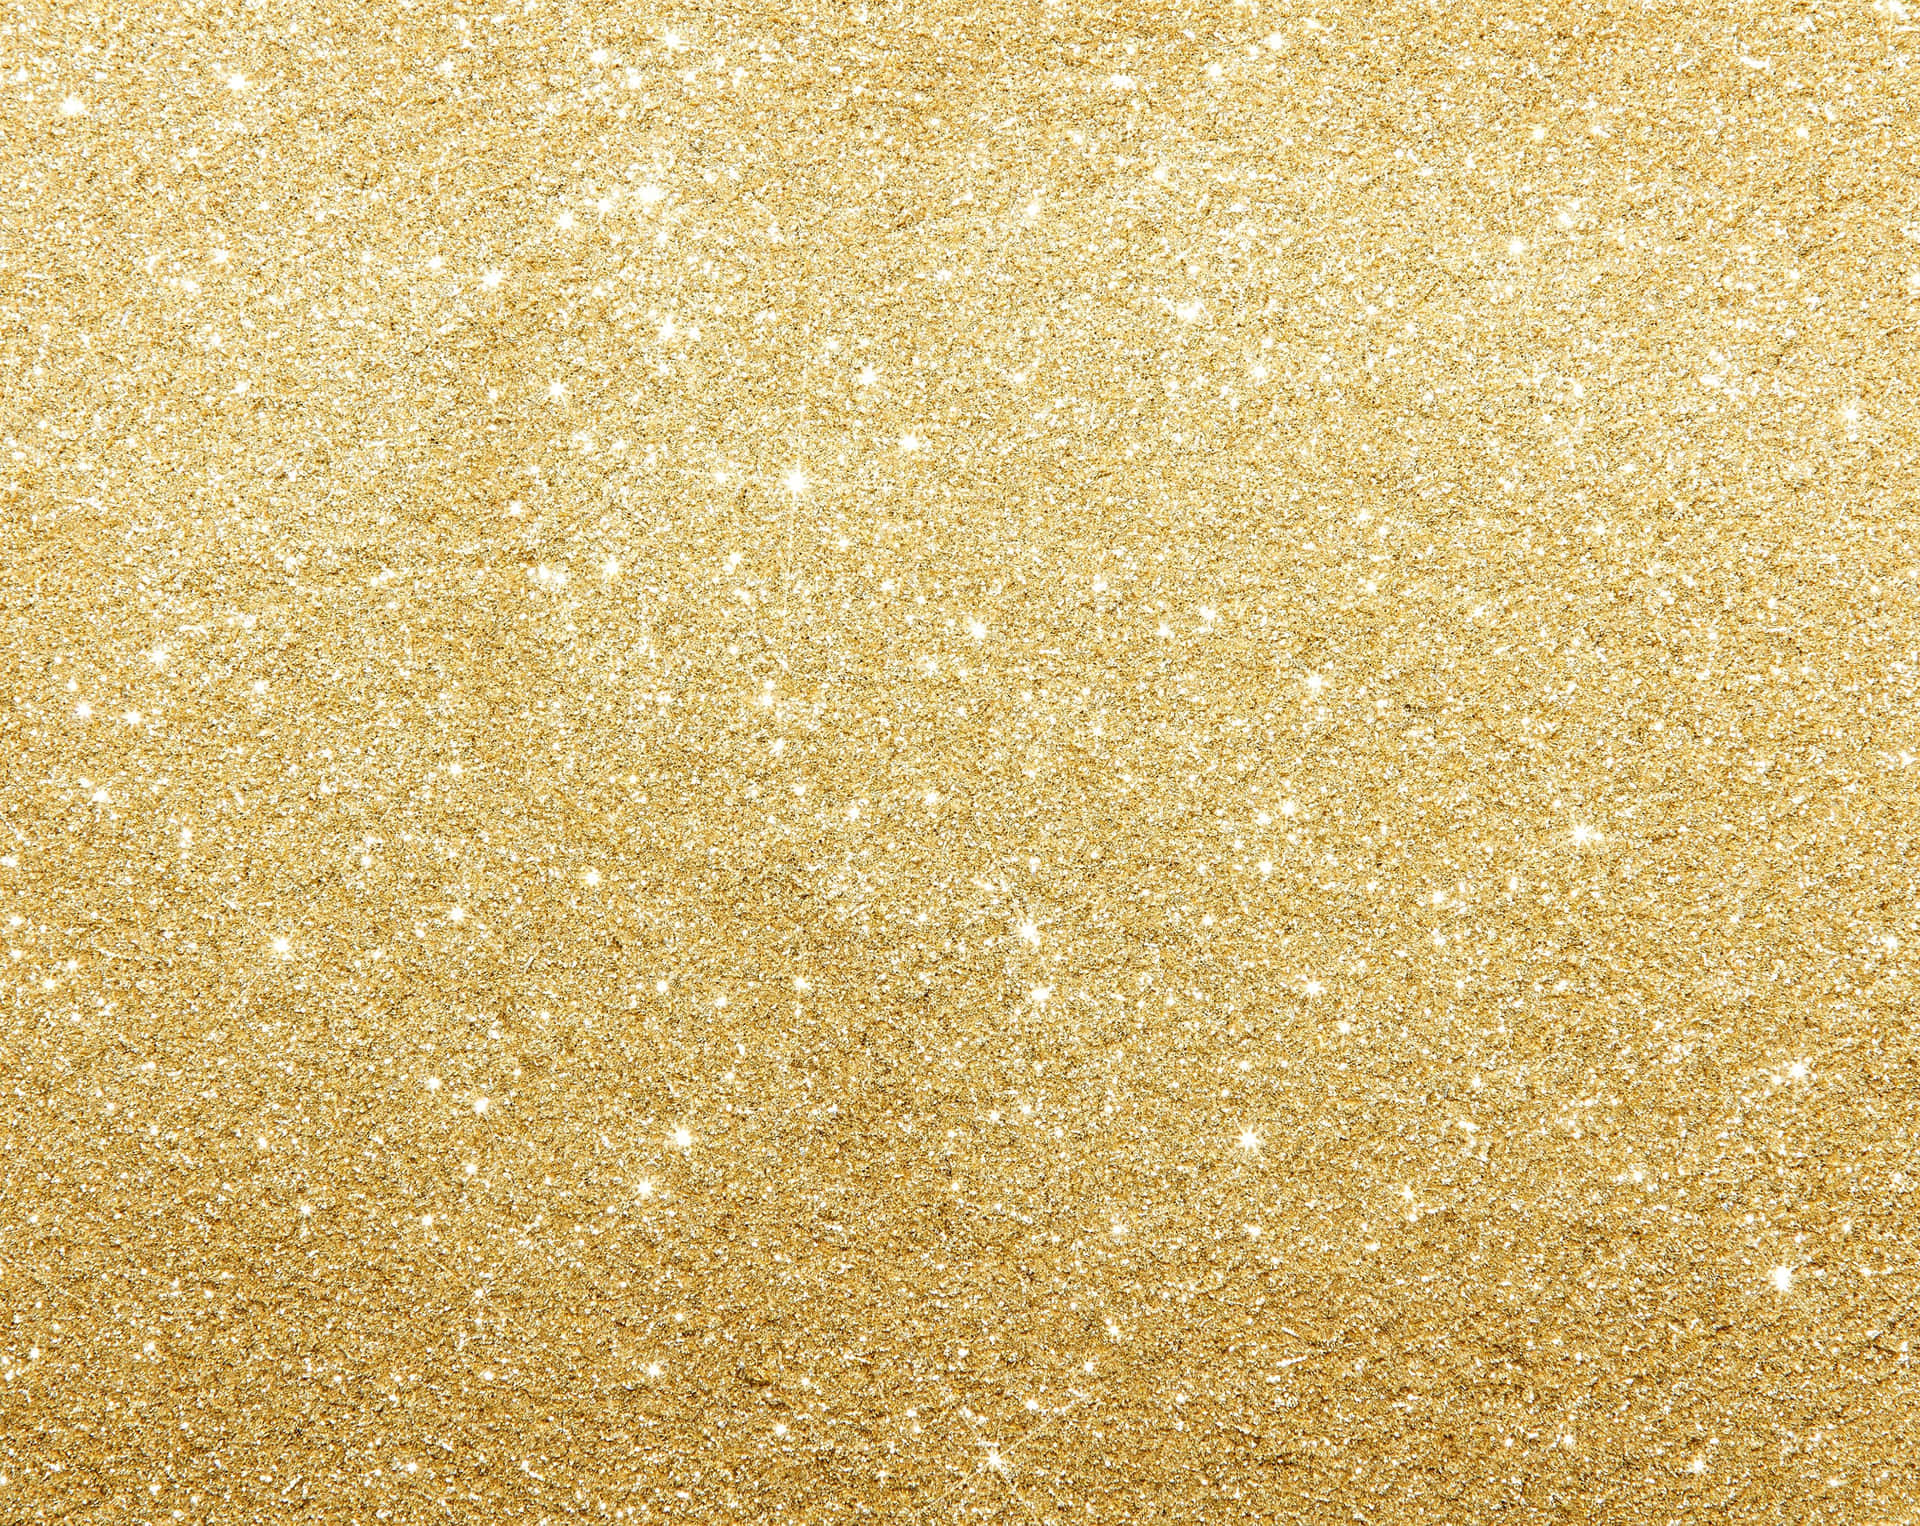 " Shine Bright with the Glittery Hues of Yellow " Wallpaper